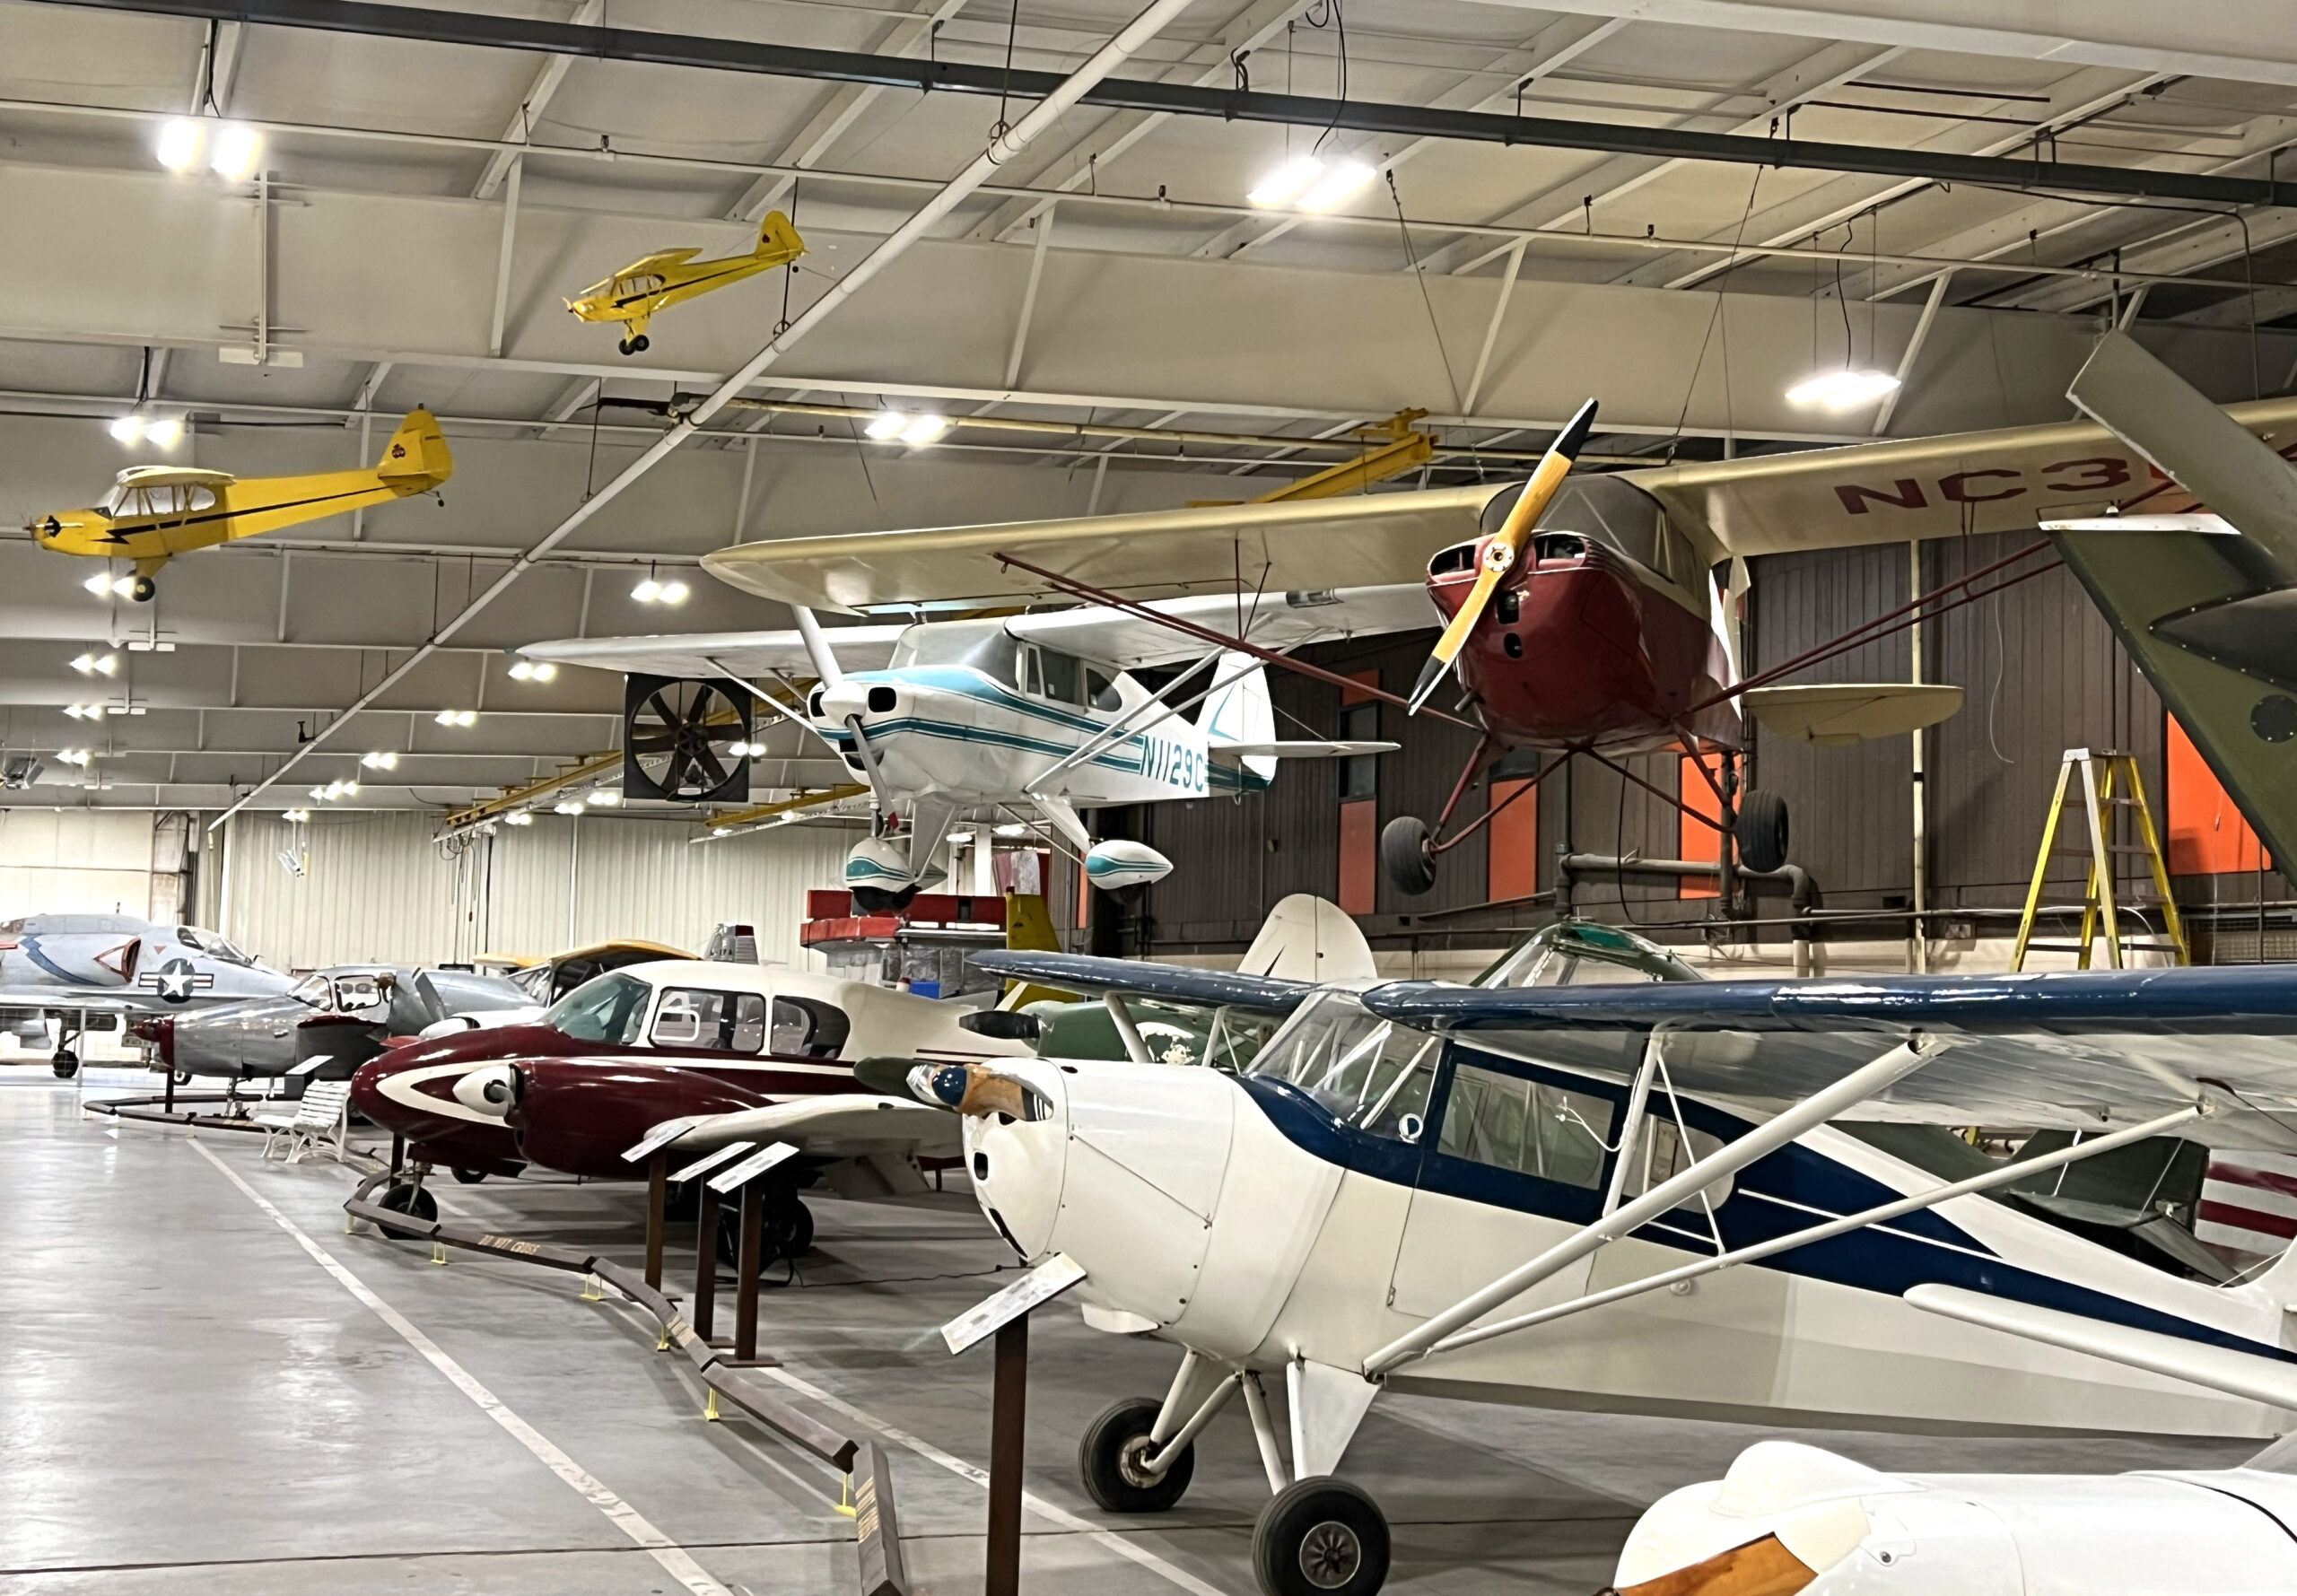 Airplanes in Hanger